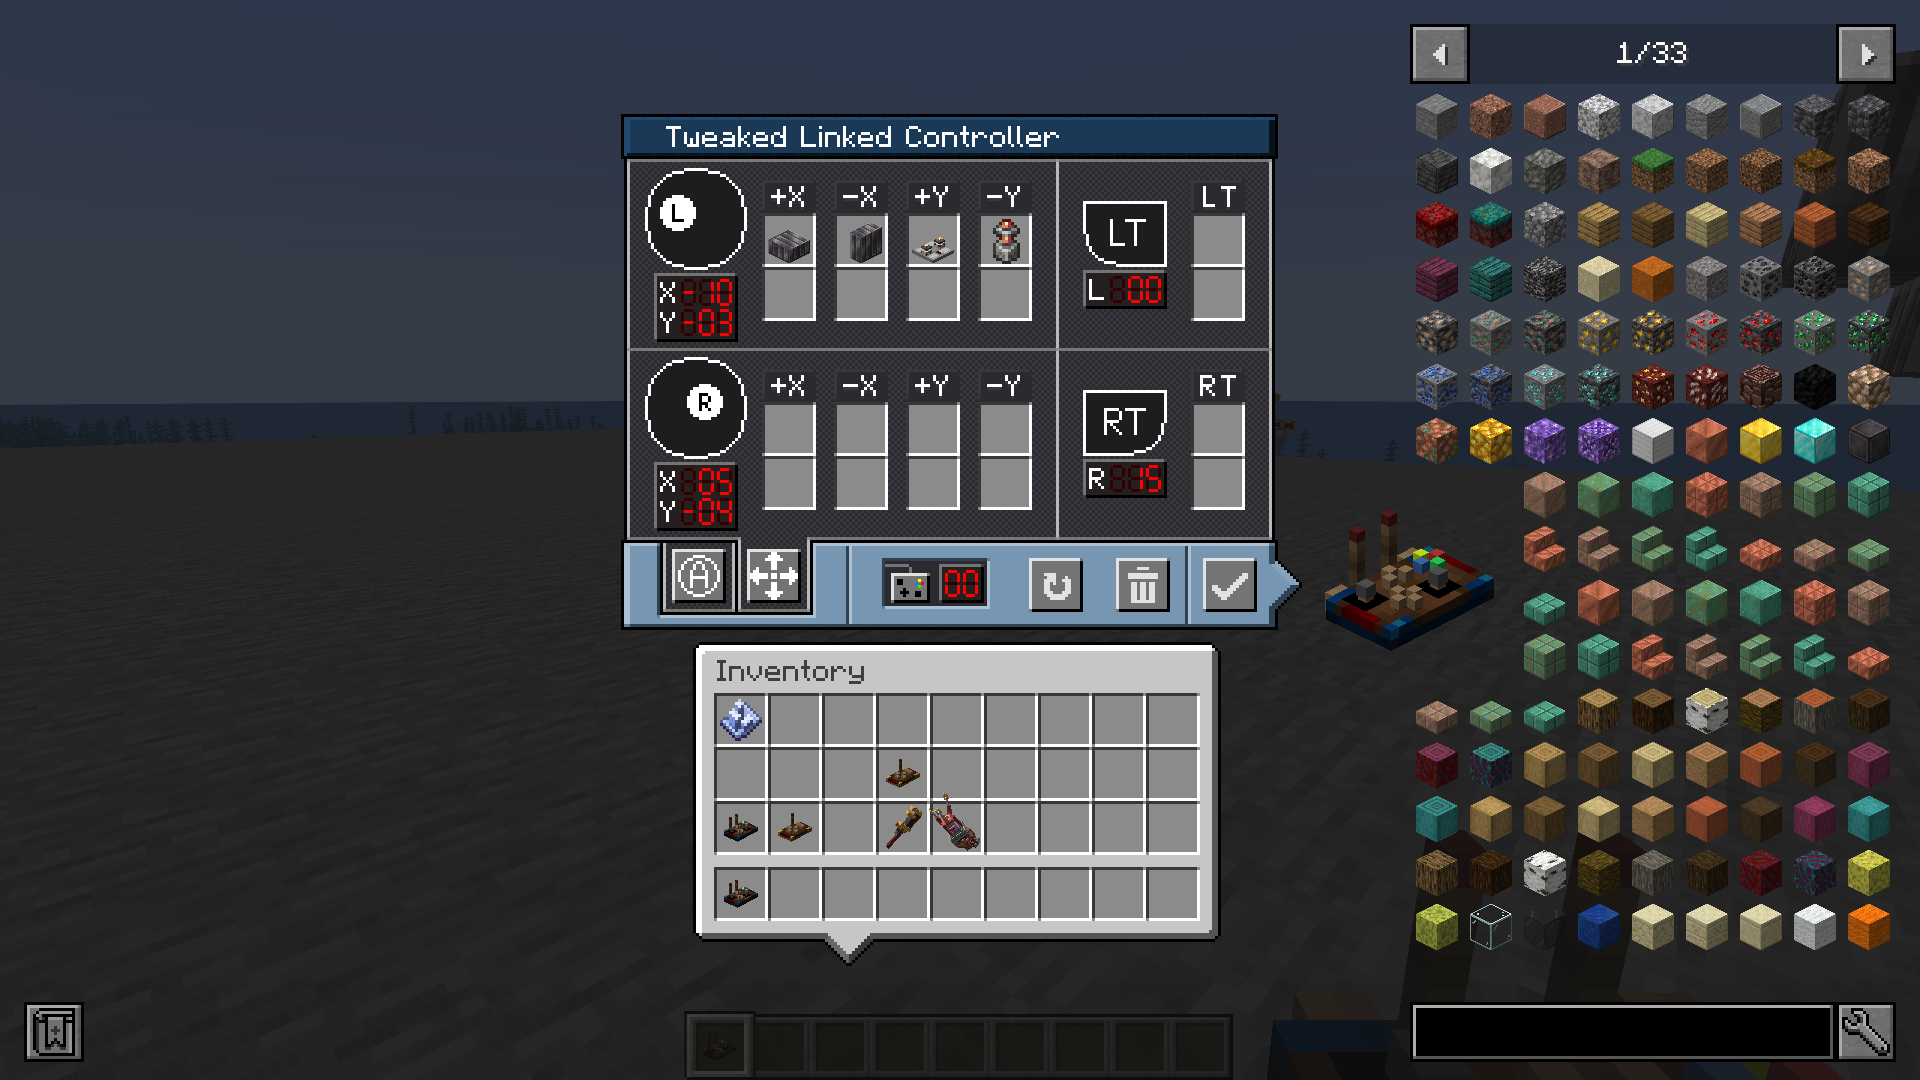 GUI of the controller